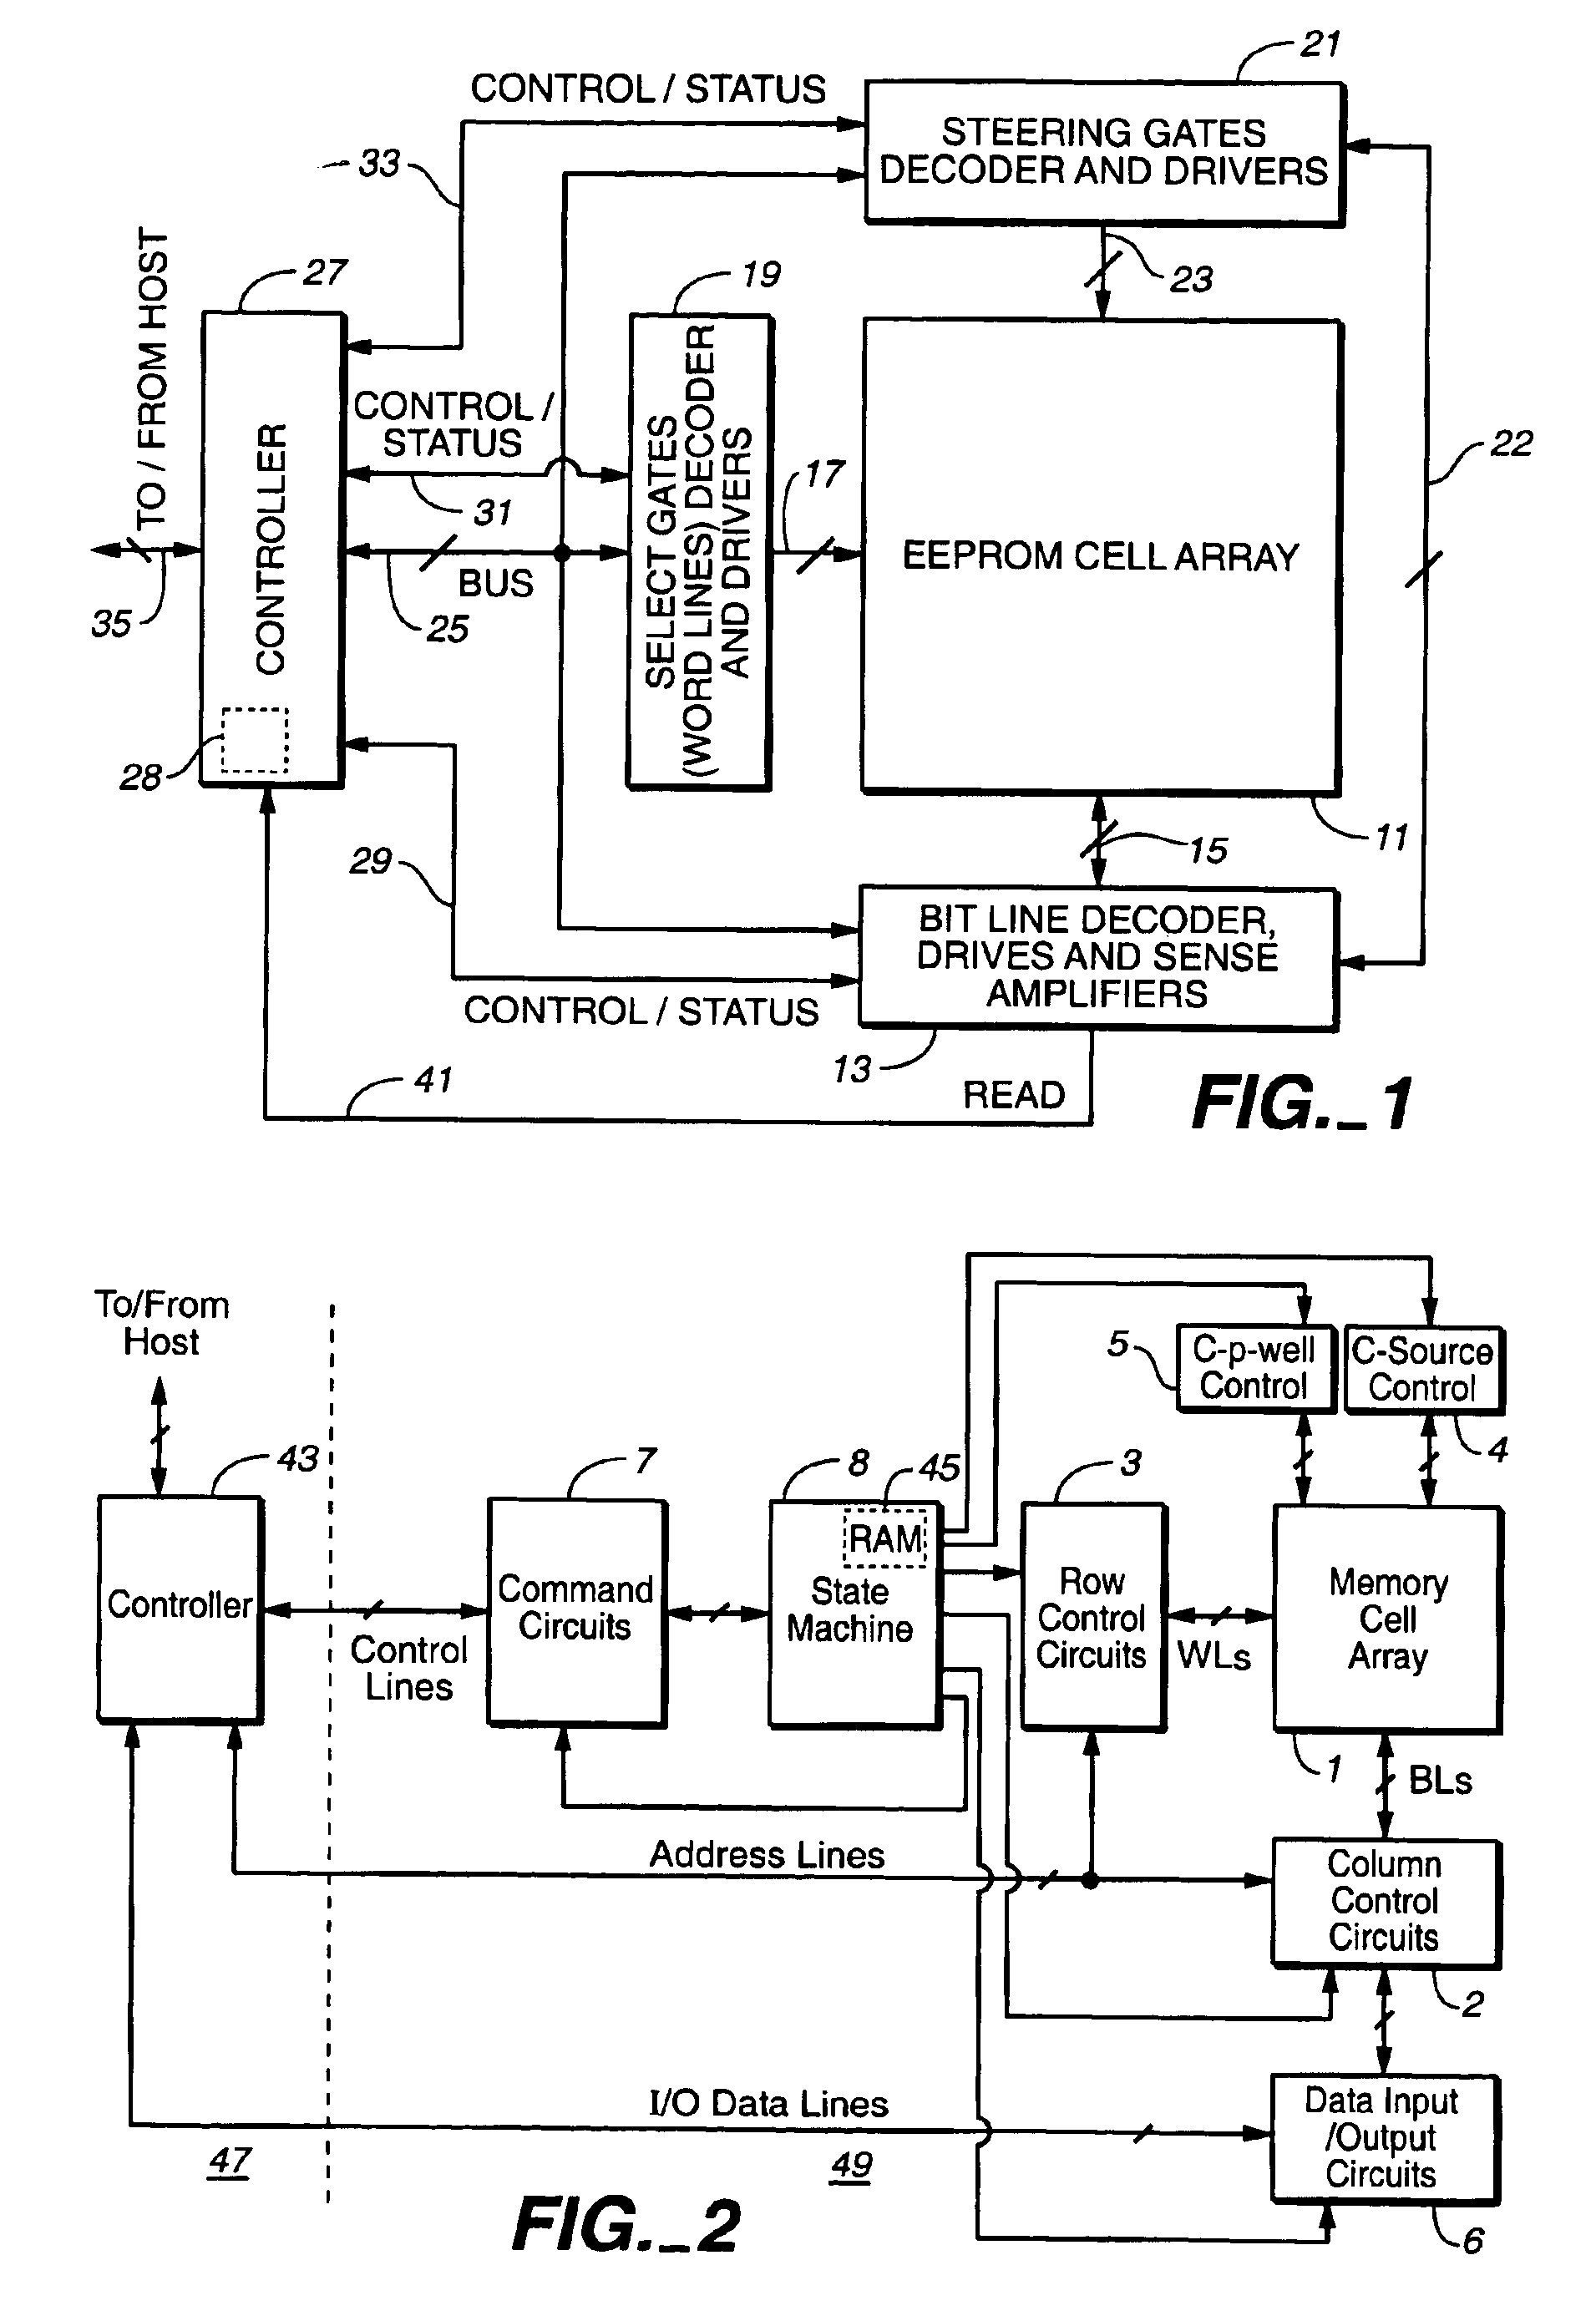 Non-volatile semiconductor memory with large erase blocks storing cycle counts